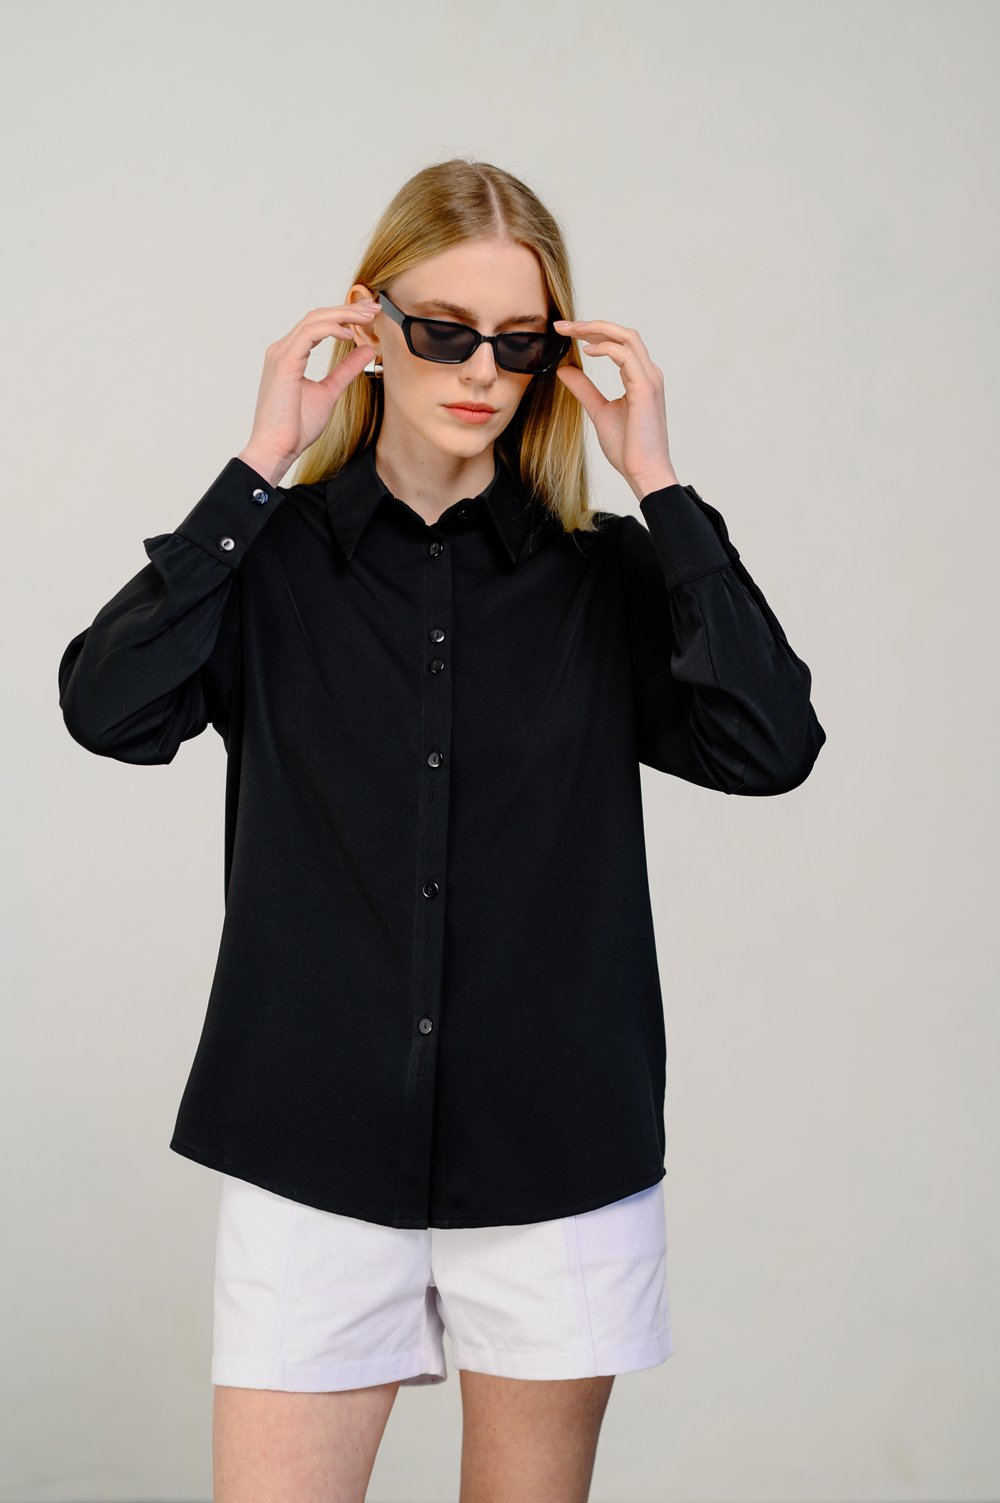 Black blouse in a romantic style